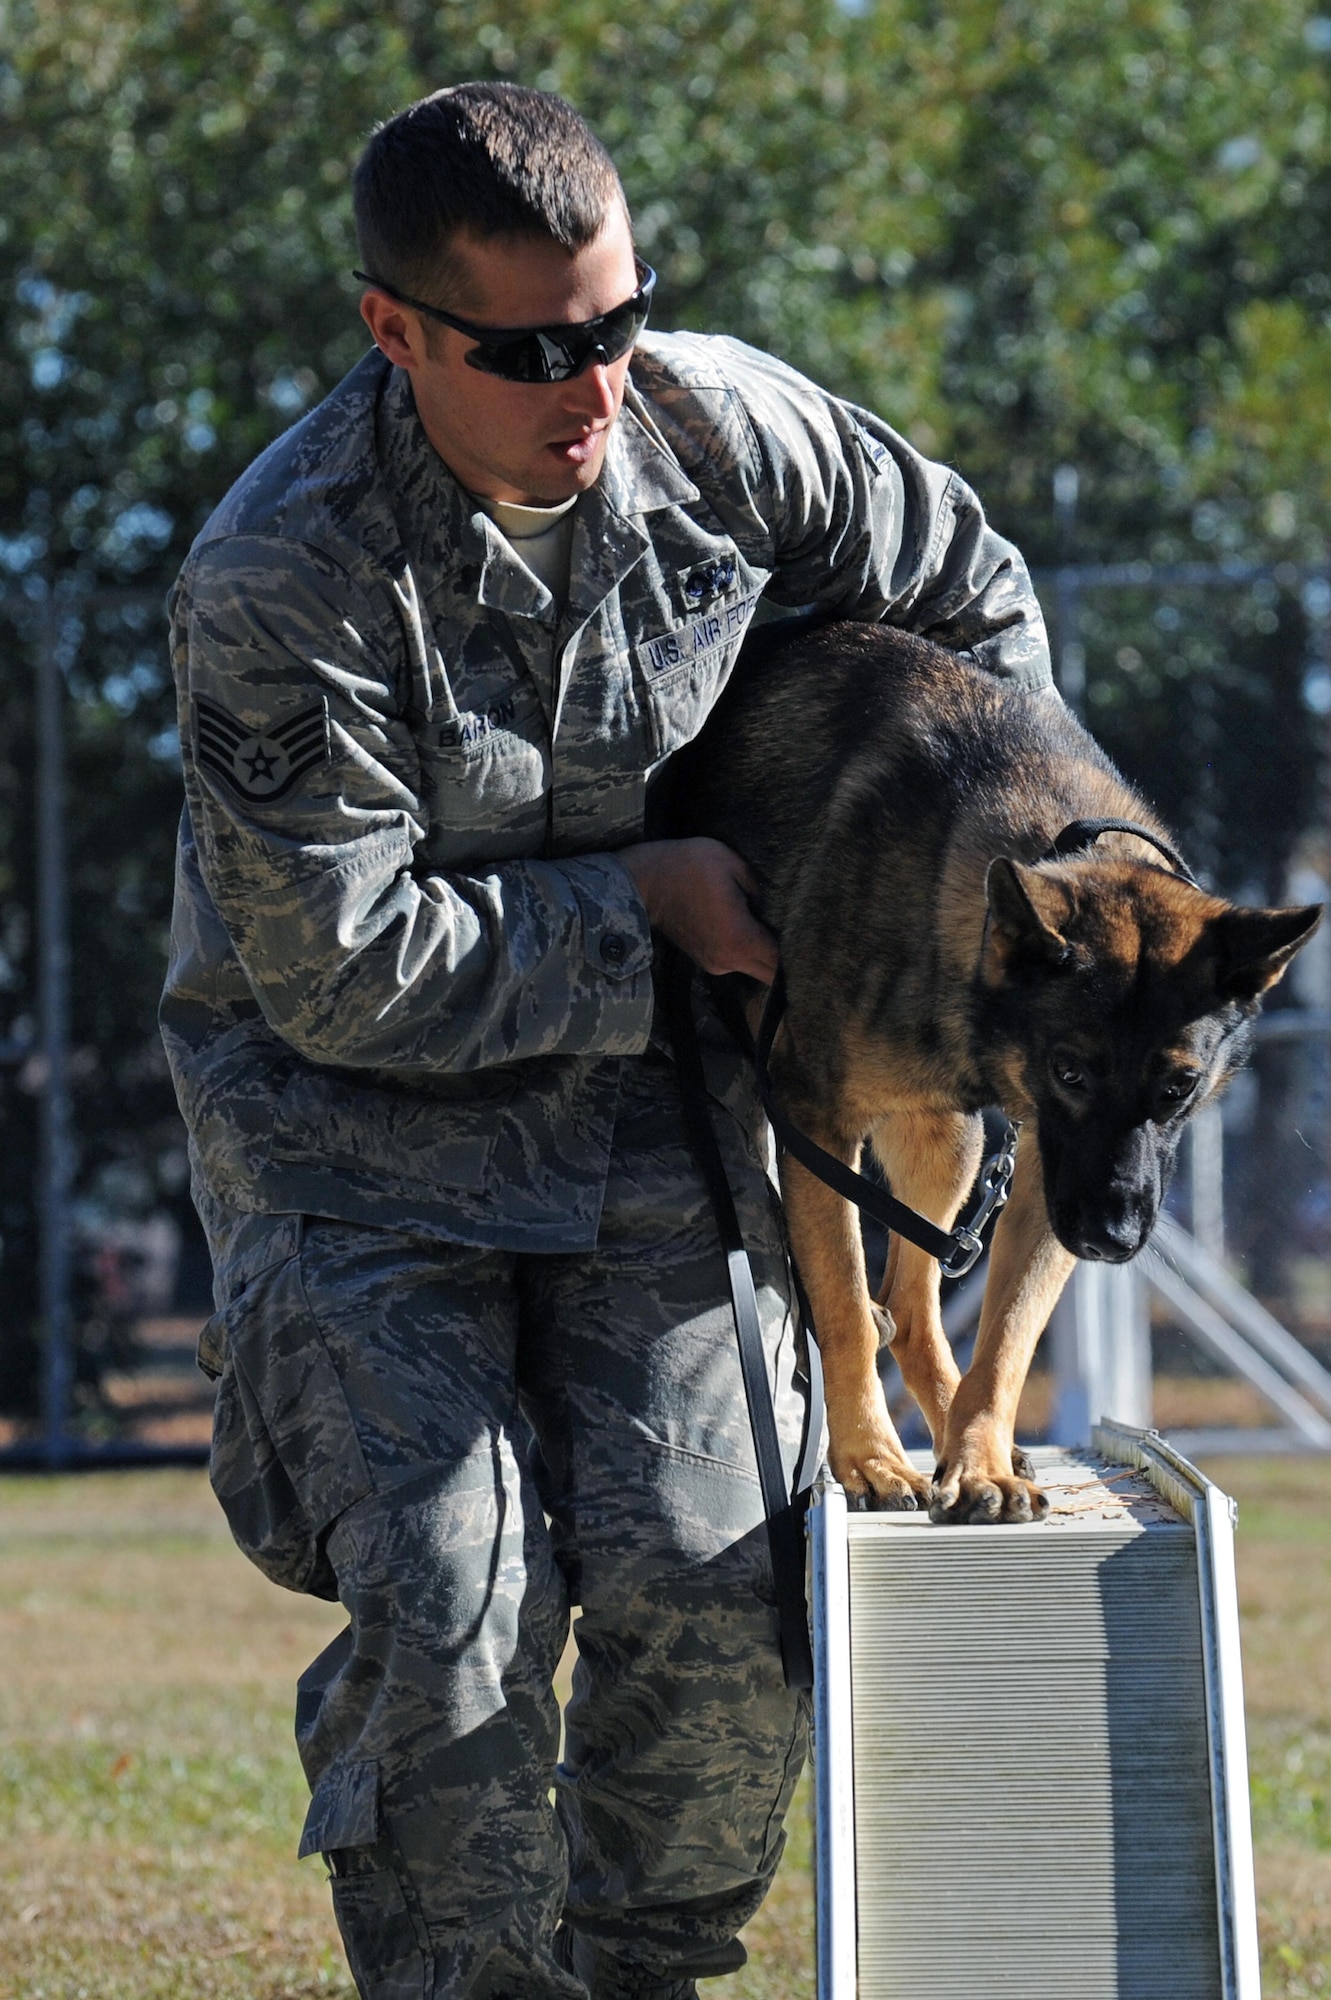 Staff Sgt. Alexander Baron helps his partner, Kuli, 4th SFS MWD, navigate an obstacle course at Seymour Johnson Air Force Base, N.C., Nov. 14, 2013. MWDs and handlers assist fellow security forces members in daily operations to protect Seymour Air Force Base personnel and resources. 